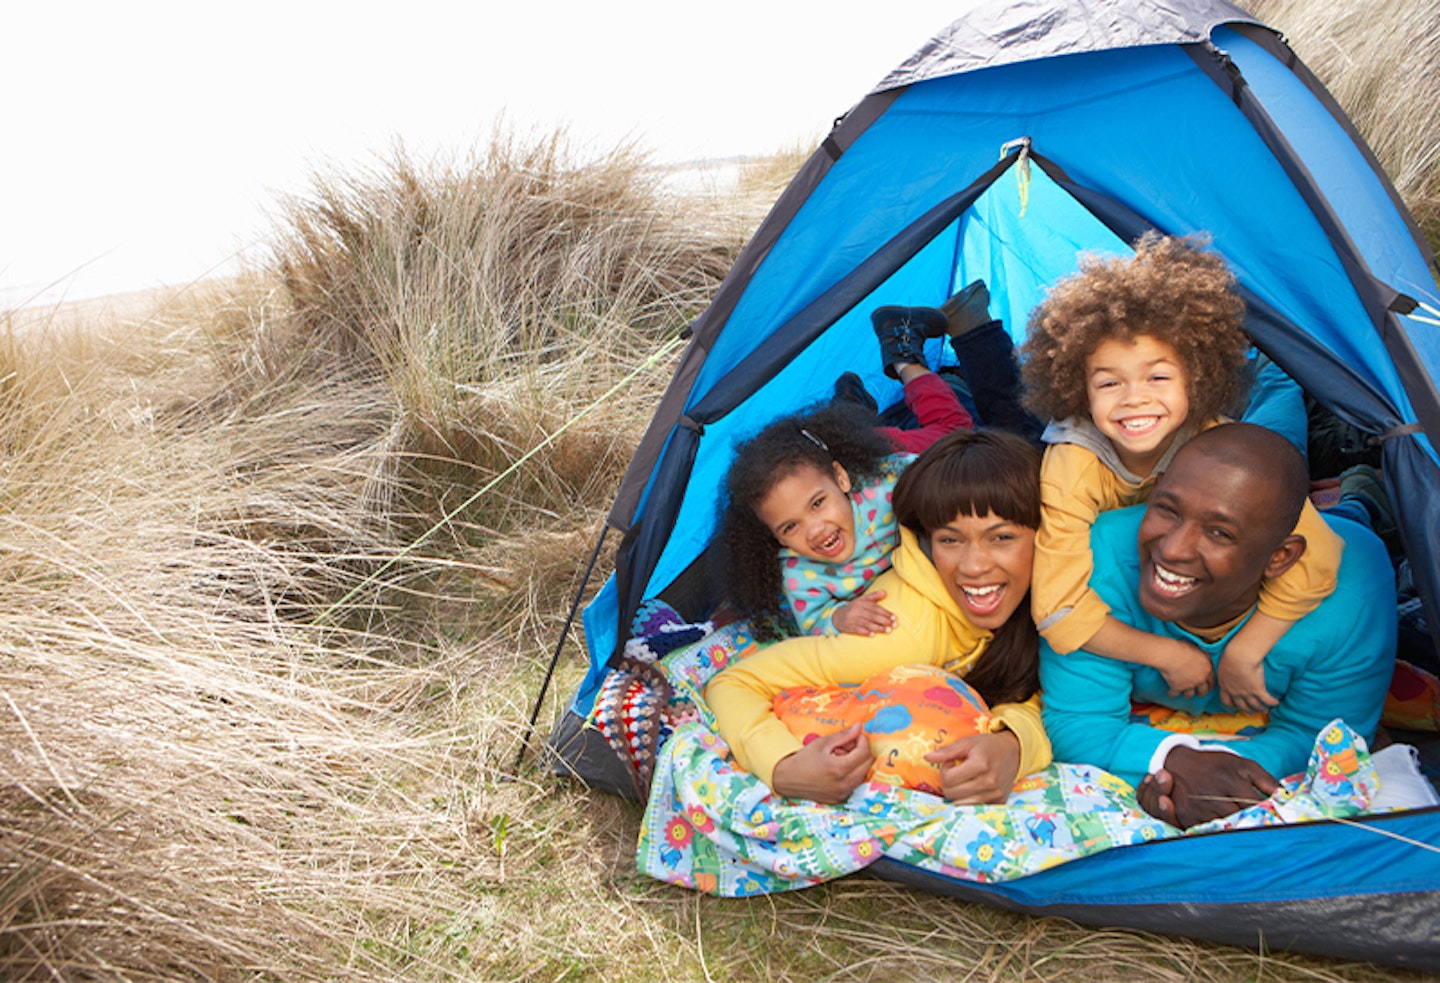 The perfect baby pop-up tent